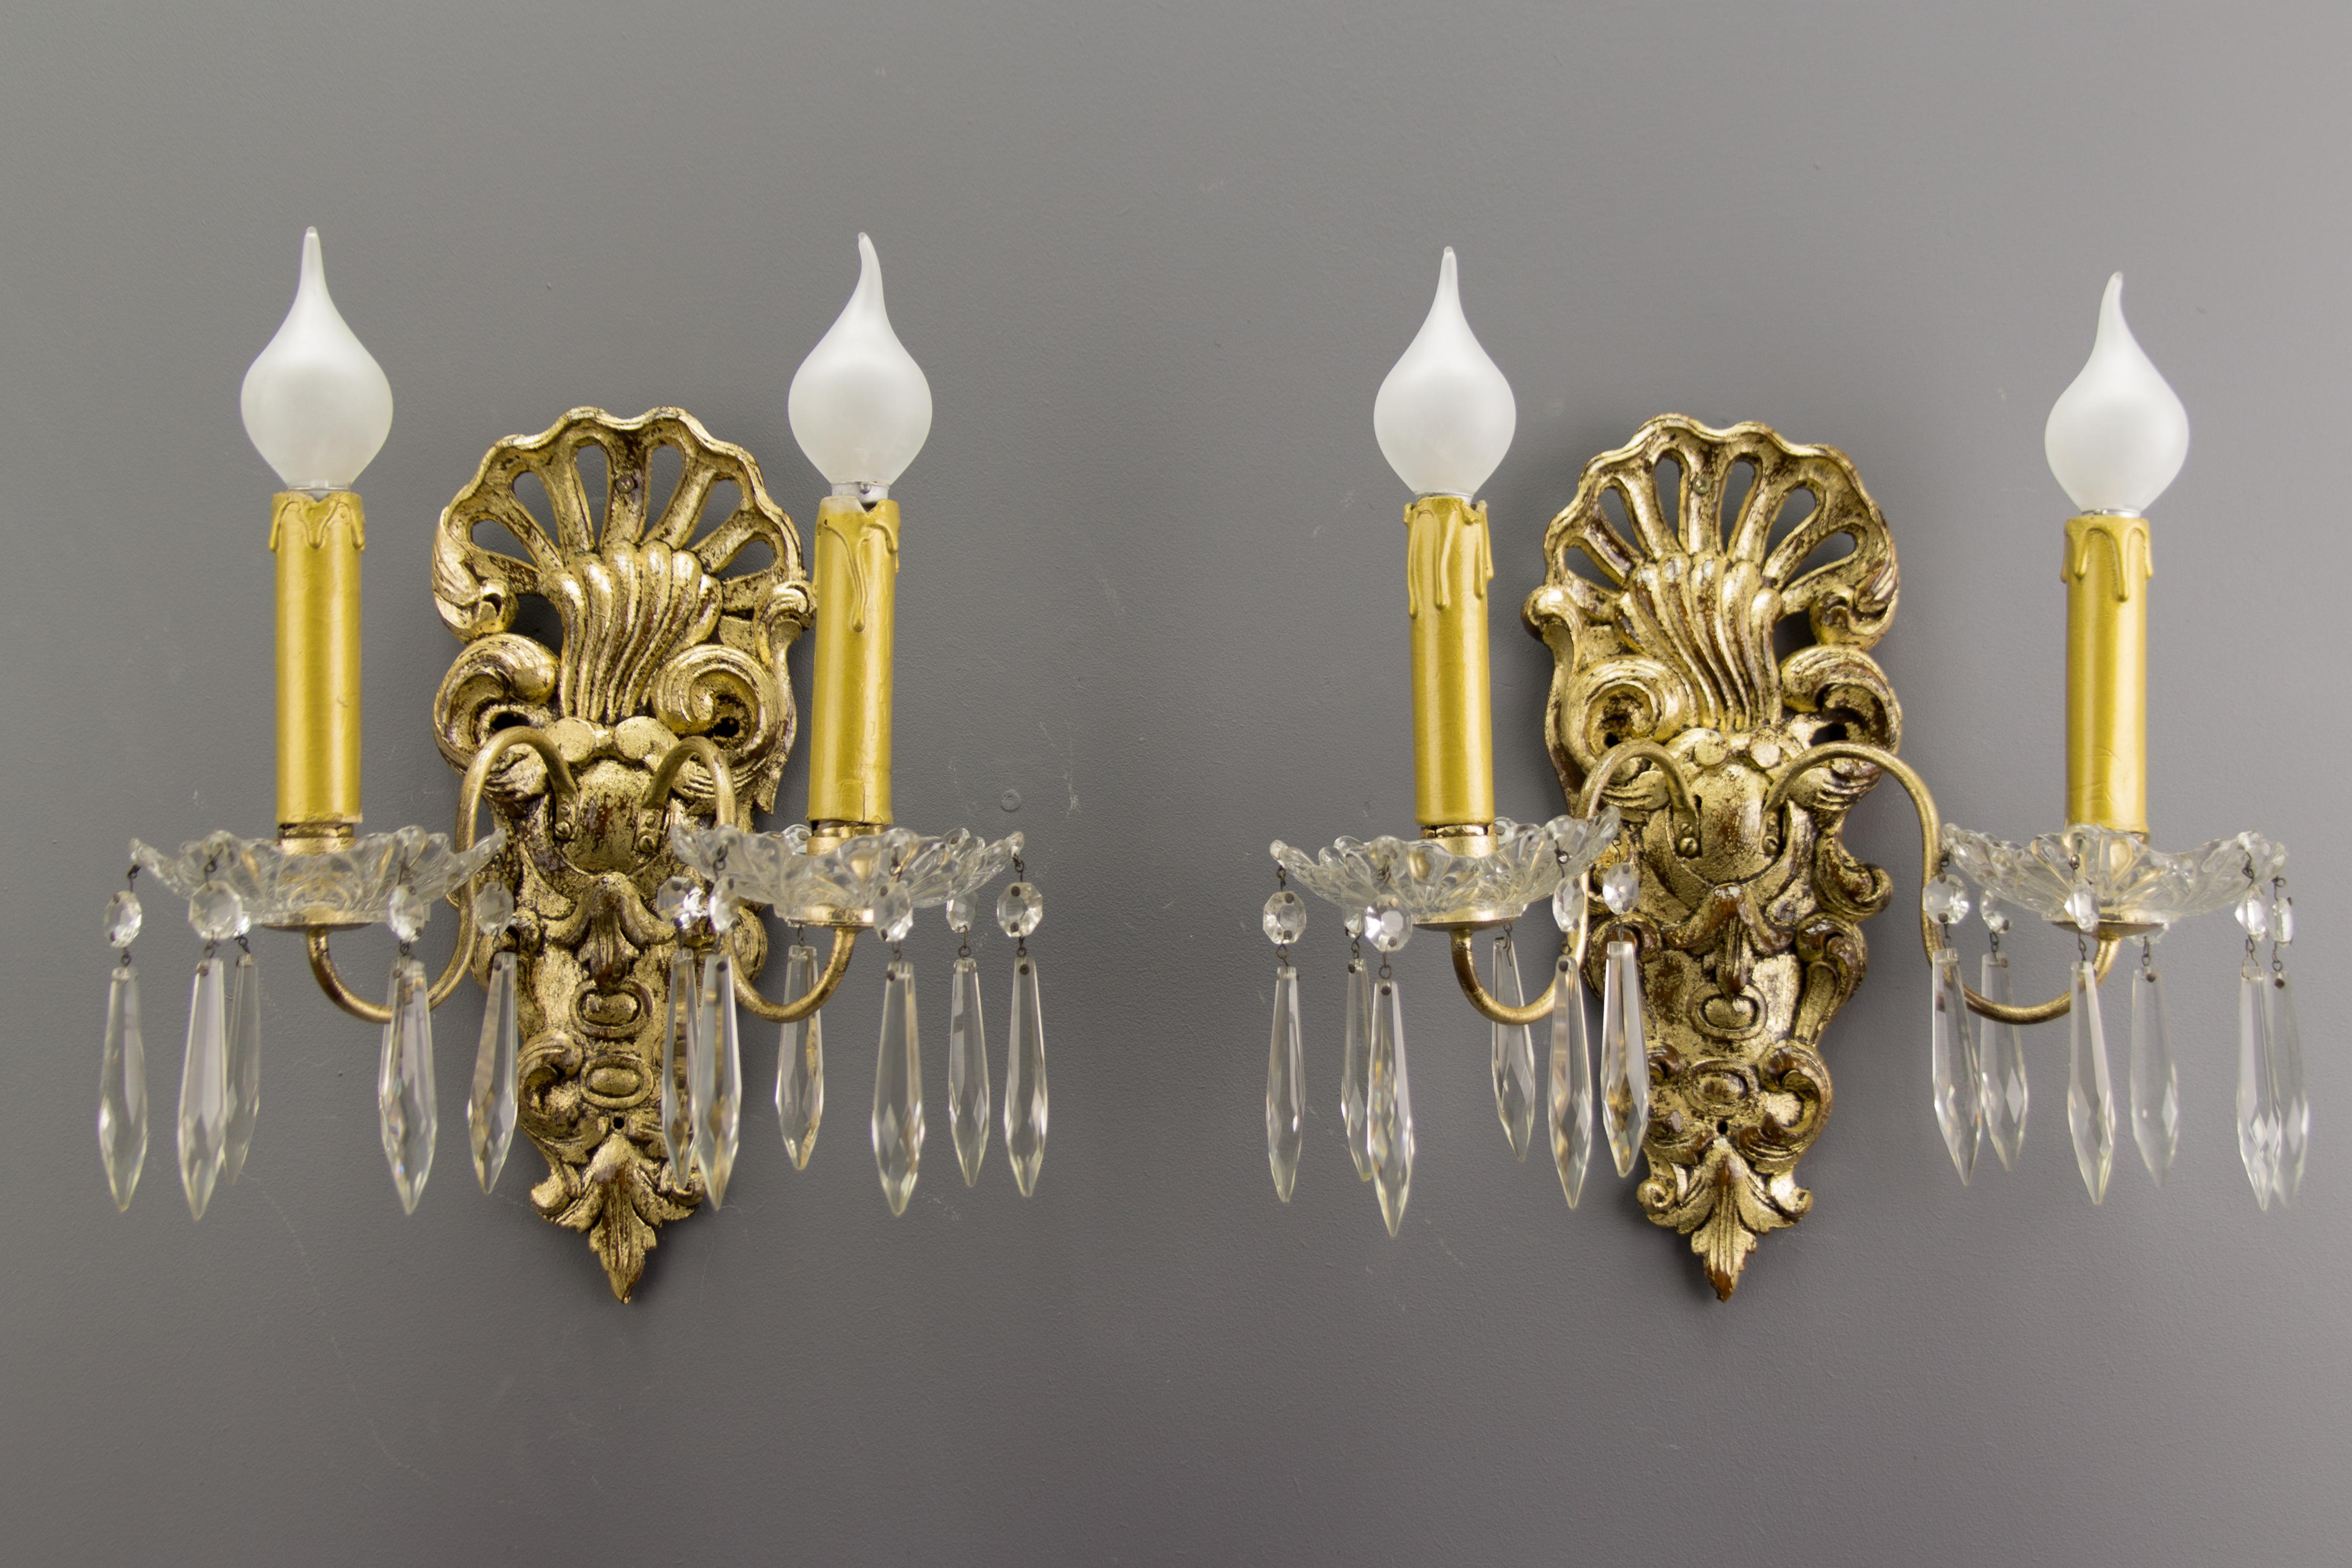 A pair of French Rococo-style carved wood sconces from the early 20th century. Sconces are electrified and ornate with pending crystal glass droplets.
Each sconce has two brass arms and each arm has one socket for an E14 size light bulb.